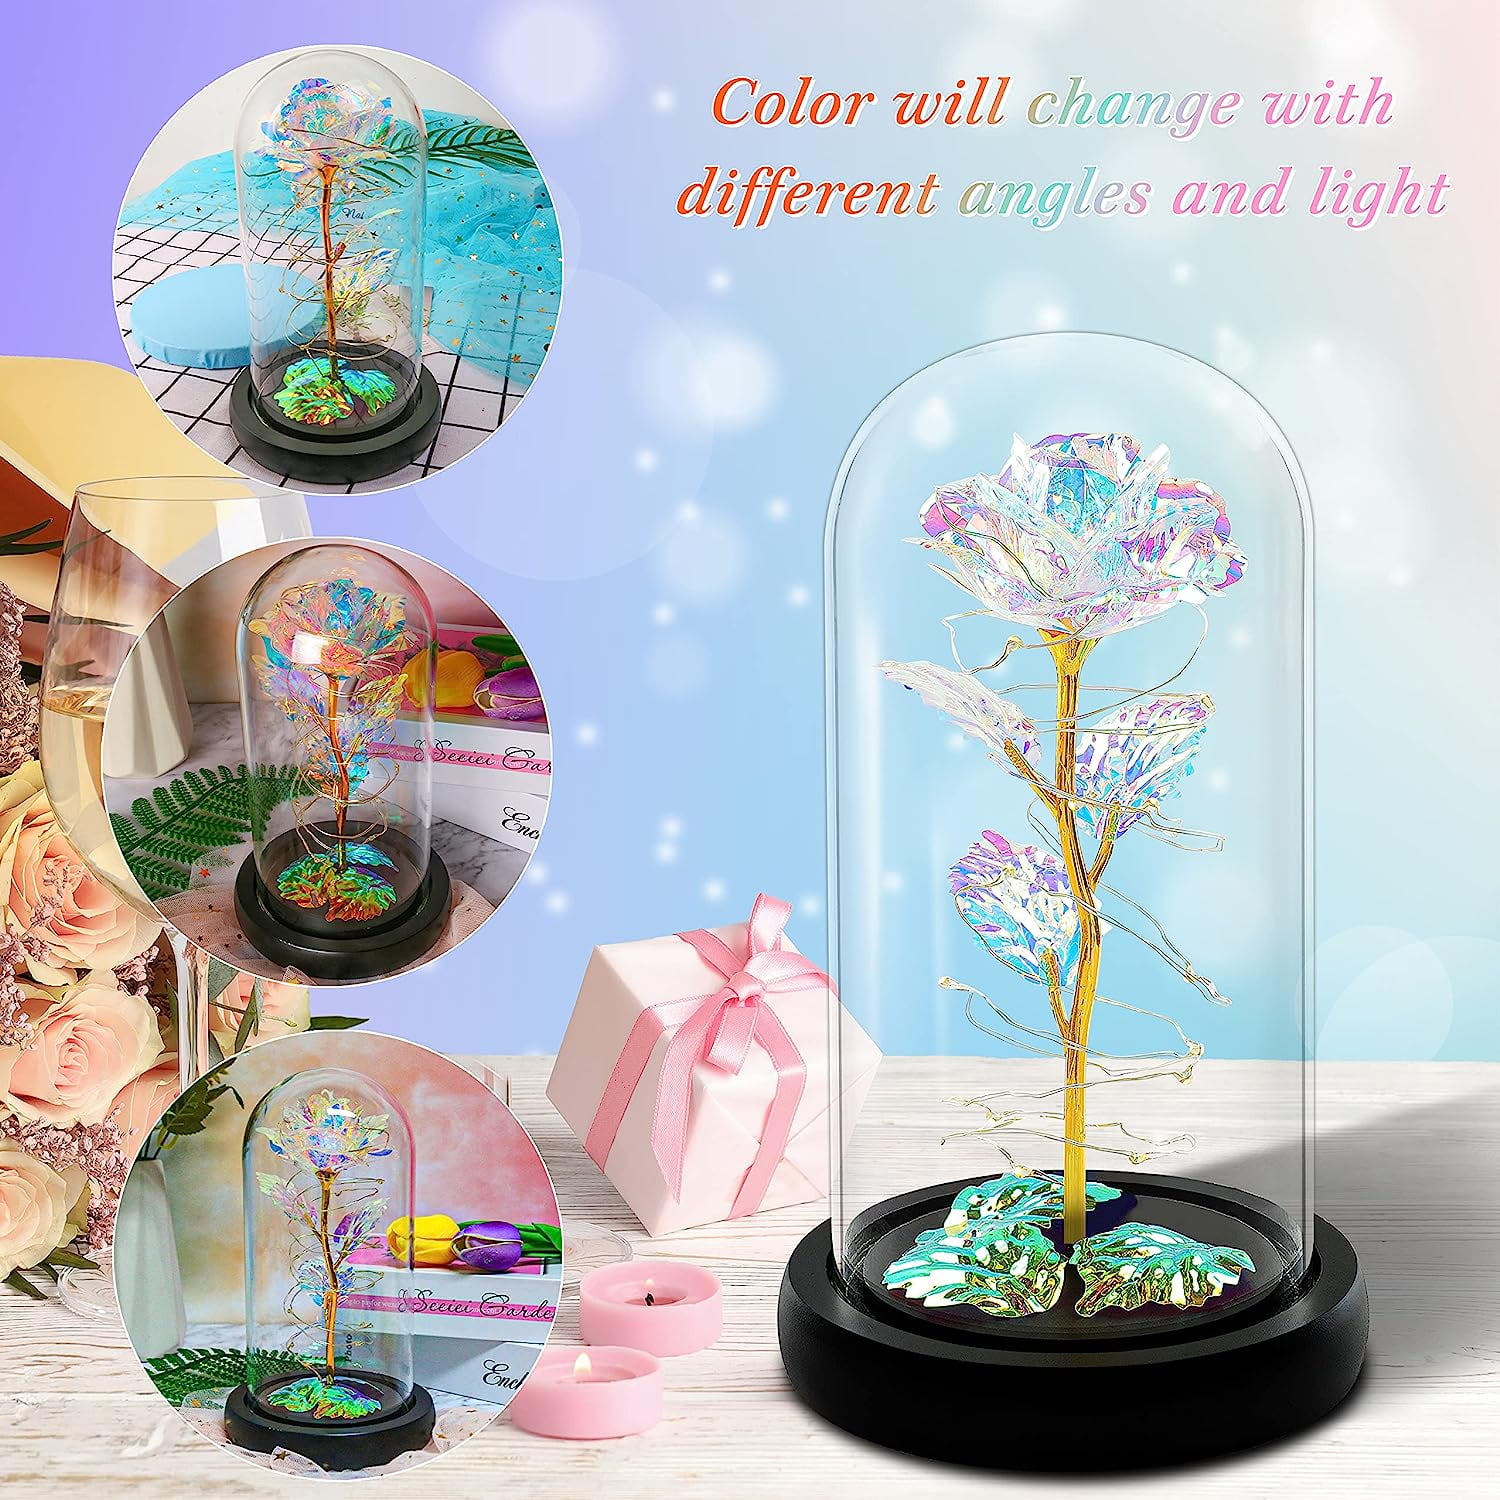 ALLJOY Unique Rose Birthday Gifts for Women Mom Girlfriend Wife Christmas Mothers Day Valentines Day Decorations Anniversary Gift for Women Her 6188348a 5ffa 4373 a08e 821a1f404478.6c19129cf10947b8a39fef52d3c69cbf